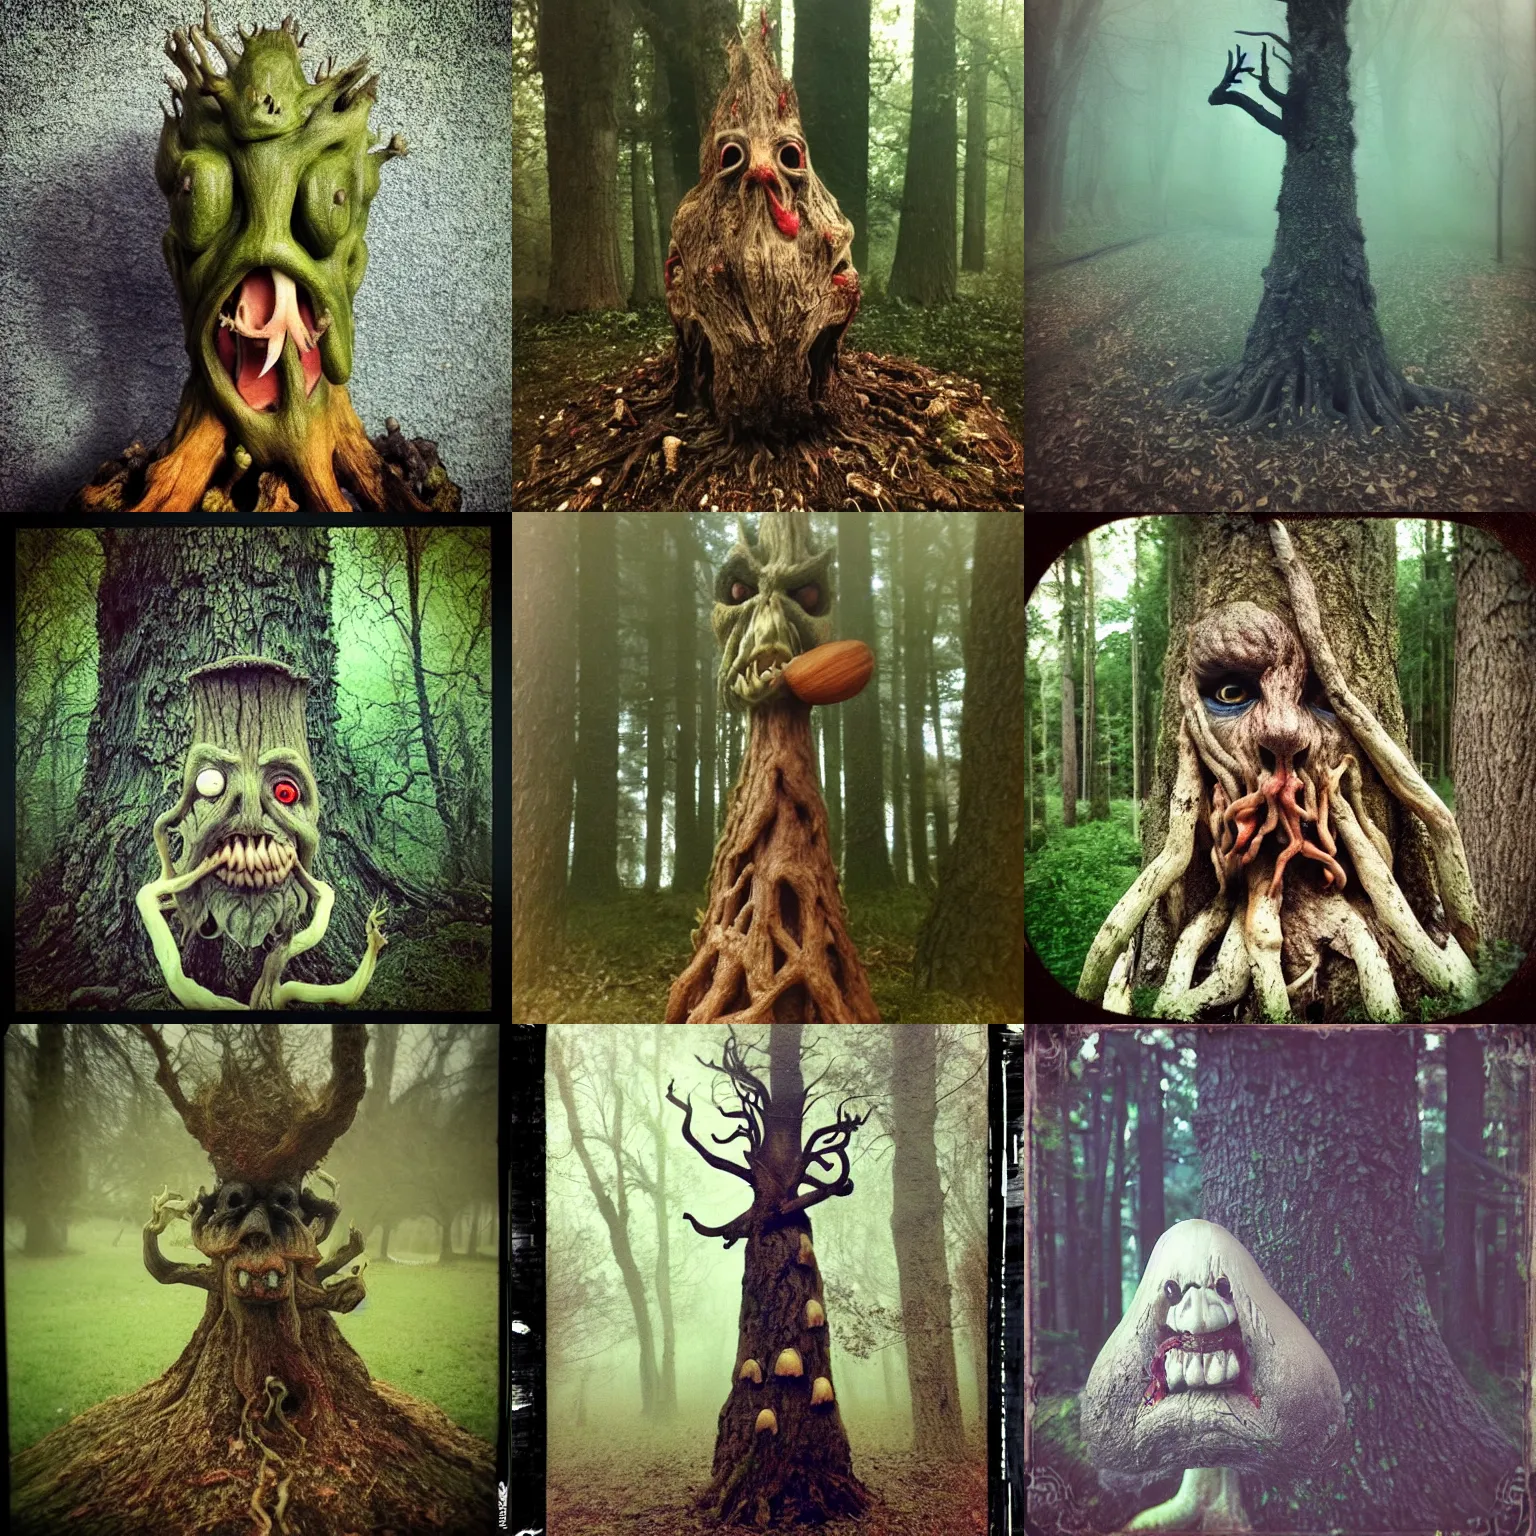 Prompt: angry hungry evil treebeard ent oak tree stuffing amanita mushrooms!!! 🍄 into his gaping maw, dark fantasy horror, ominous, disturbing tortured face made of wood, oak tree treant, foggy, eerie mist, low quality instant camera photo